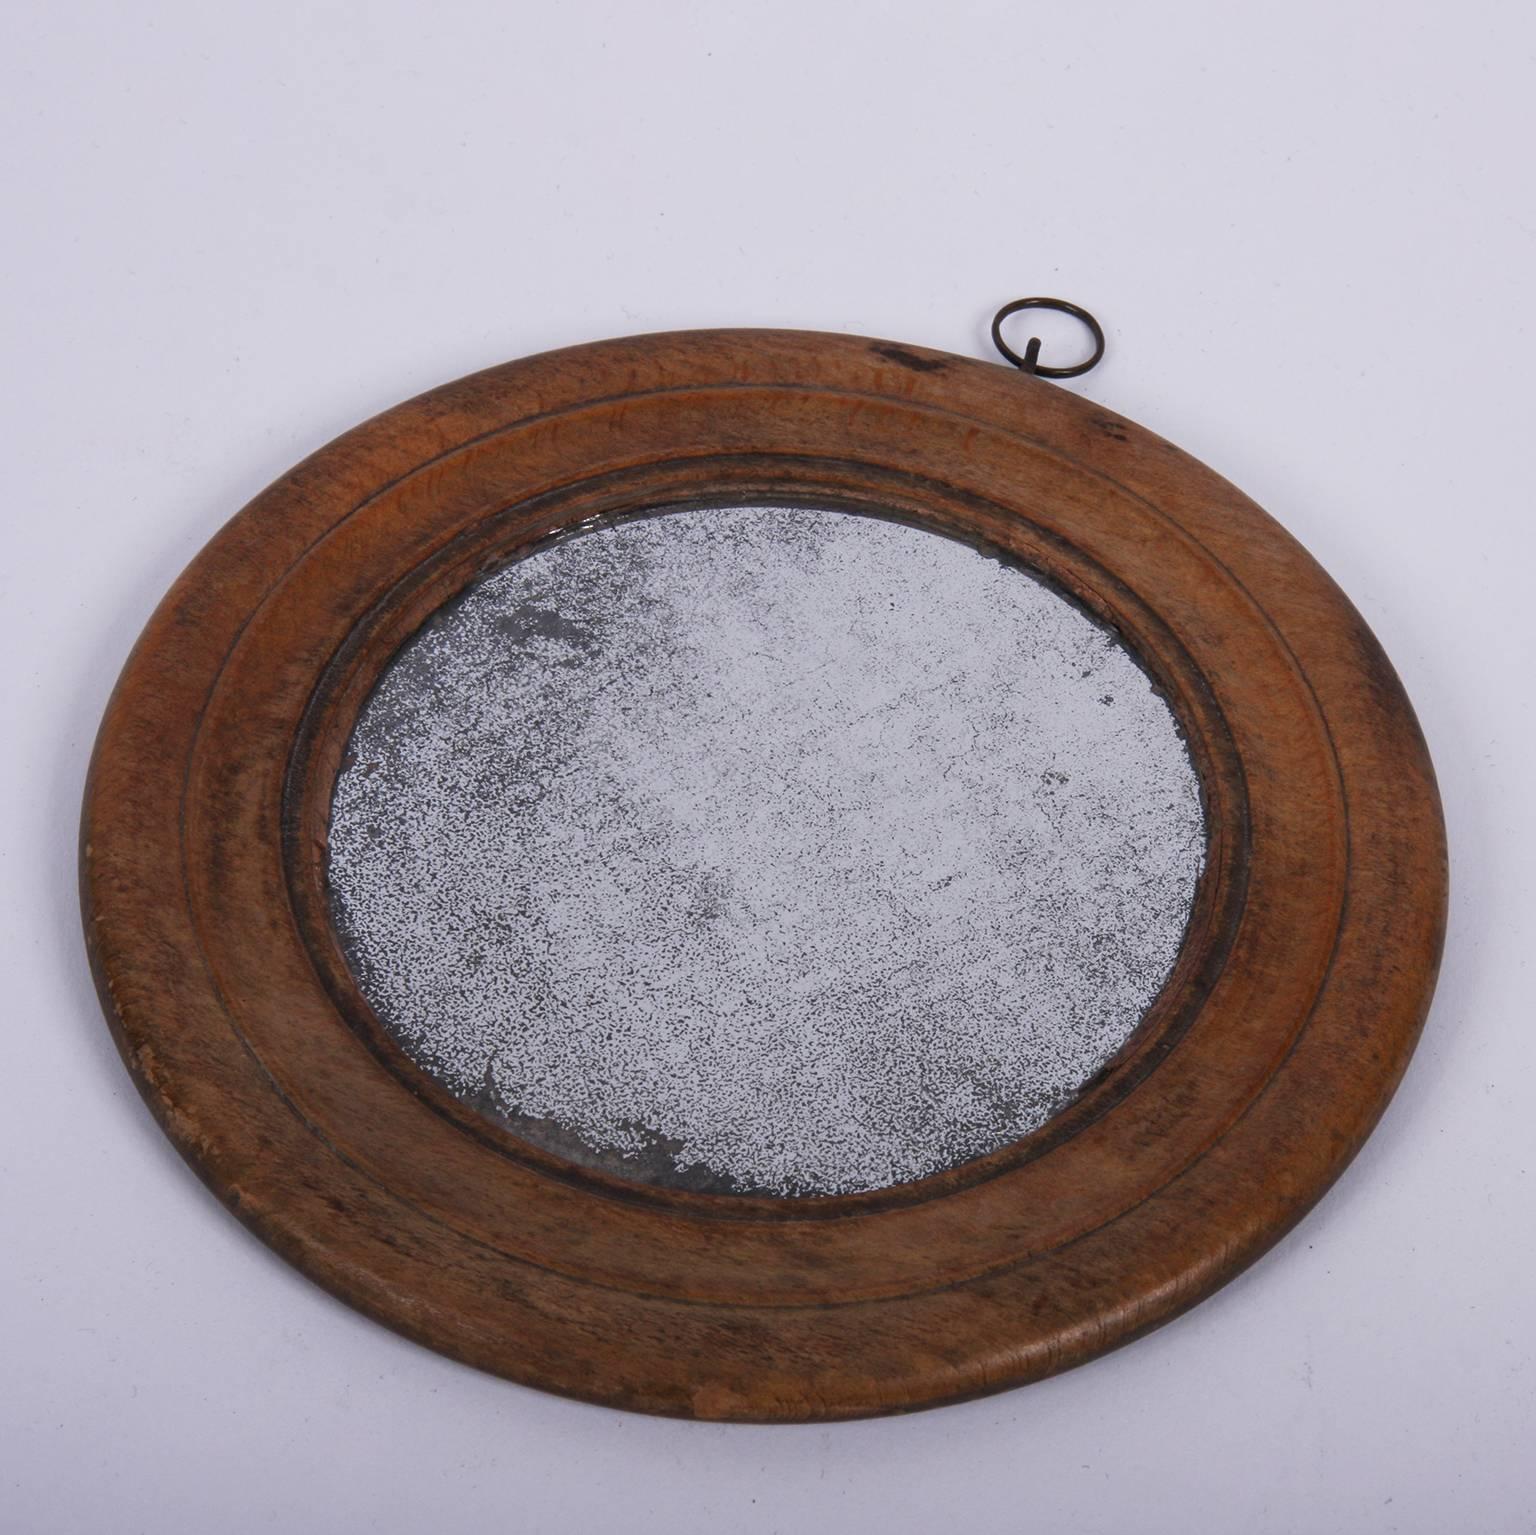 English, 19th century

A lovely small round mirror with a wooden frame and original sparkly foxed glass. This mirror has a small round metal hook on the top.